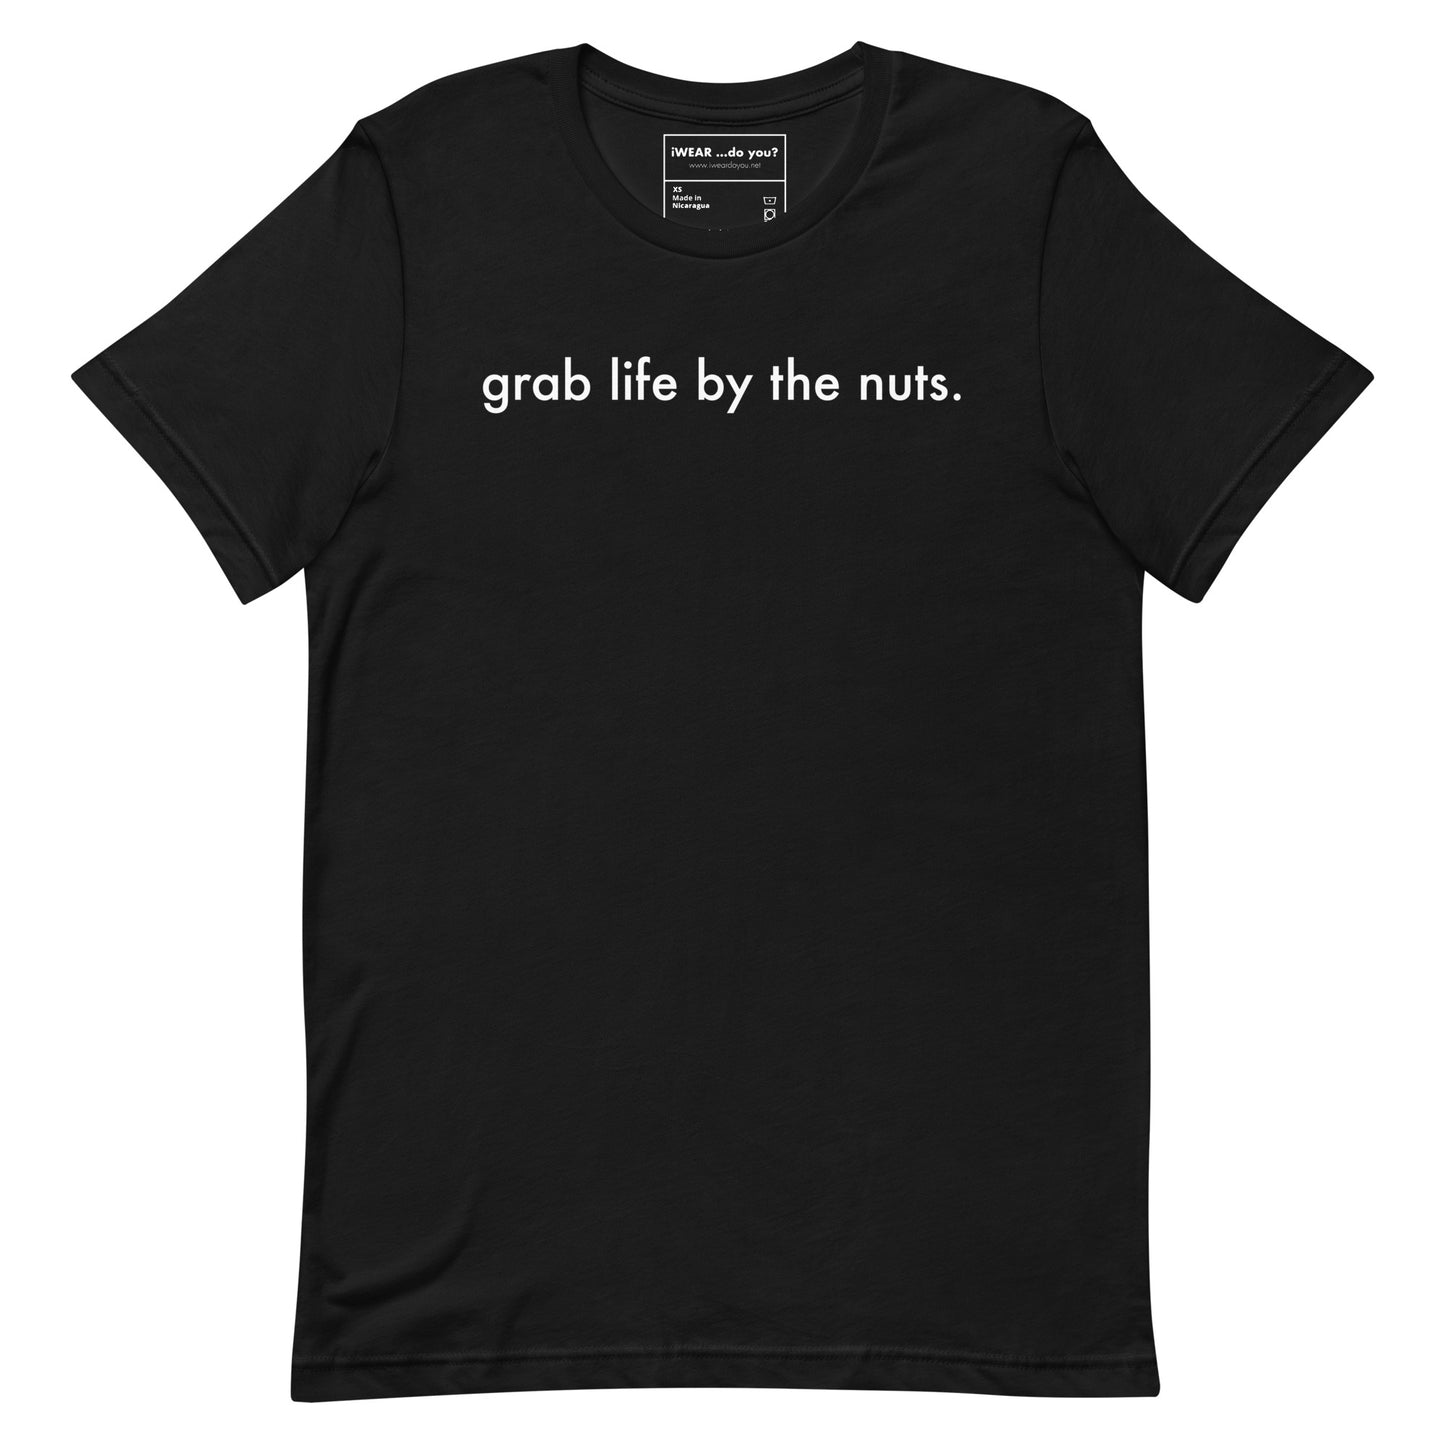 grab life by the nuts. tee